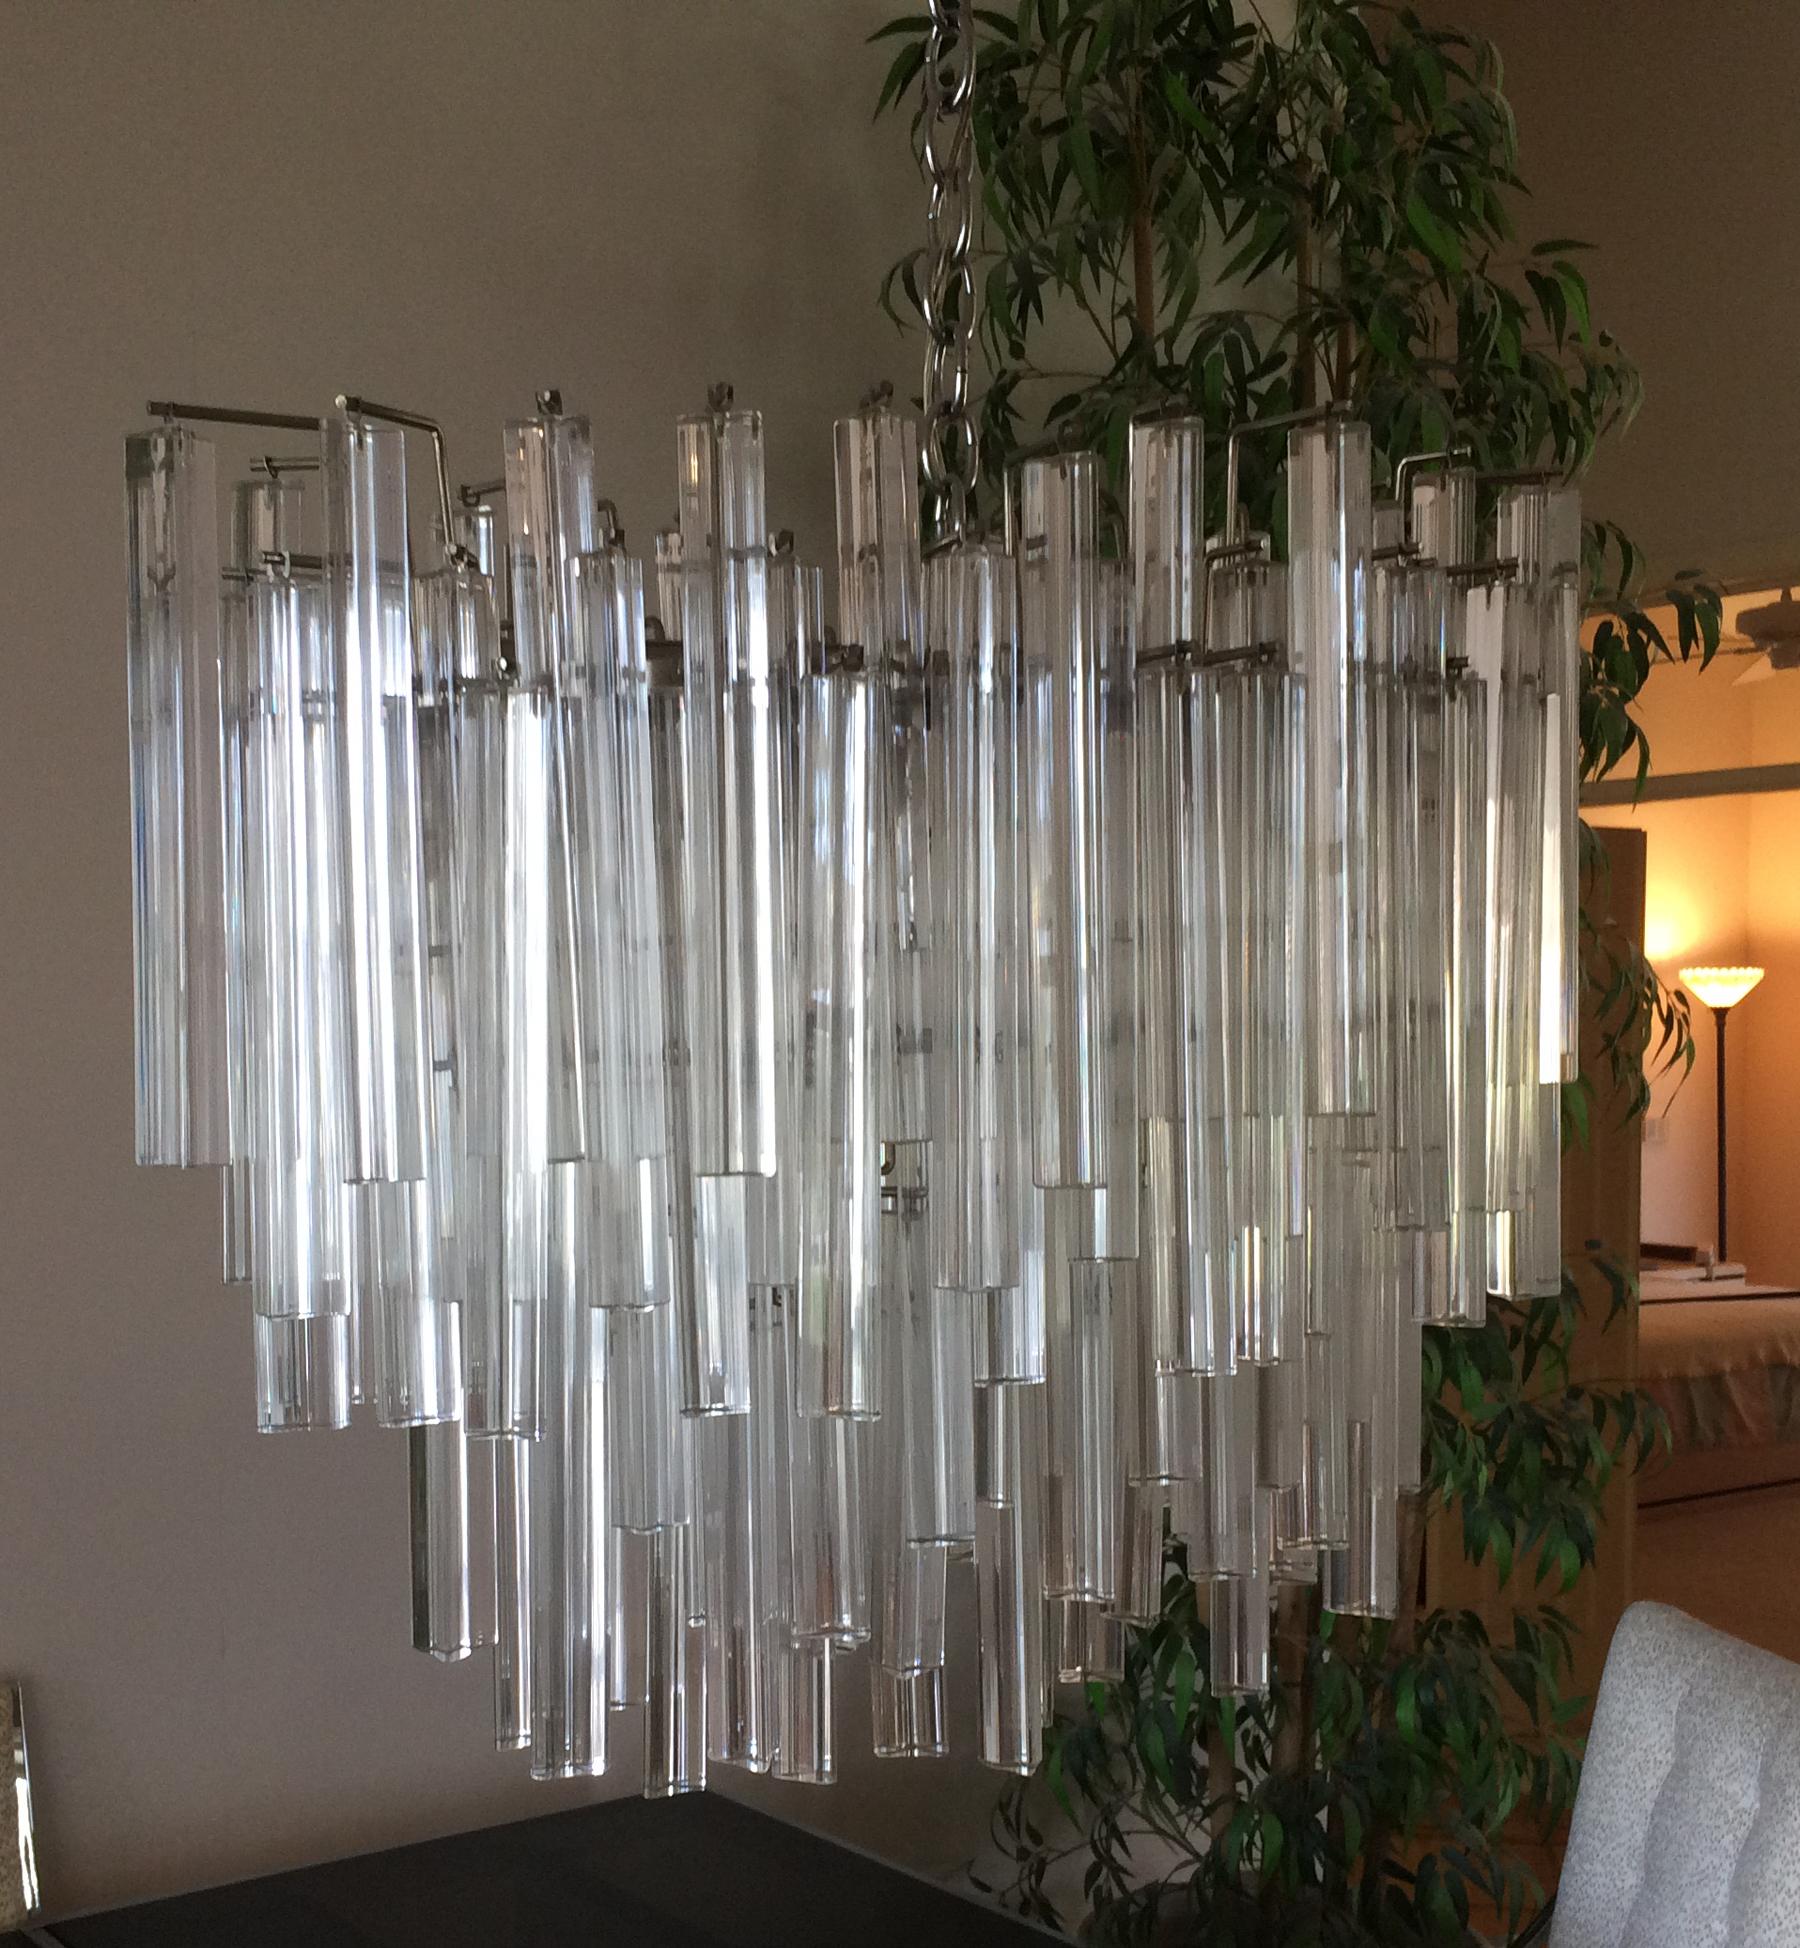 Marked Camer Glass made in Italy. Has approximately 121 glass drops. Multiple tiers make for a very substantial chandelier. All in very good condition. Measures: Approximately 32 inches wide x 24 high x 18 deep.